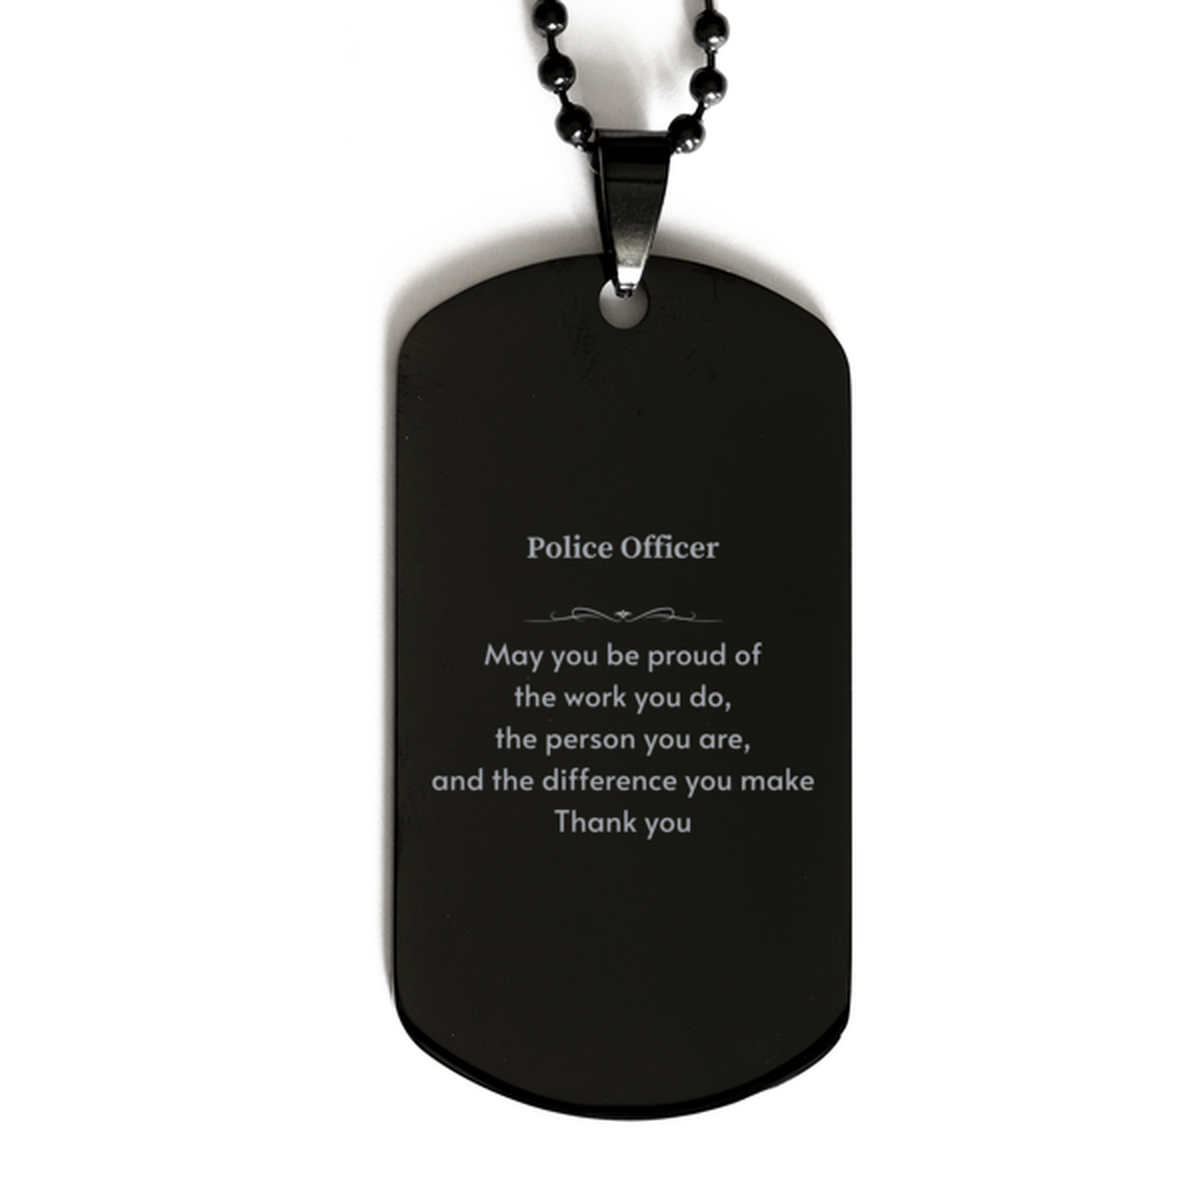 Heartwarming Black Dog Tag Retirement Coworkers Gifts for Police Officer, Police Officer May You be proud of the work you do, the person you are Gifts for Boss Men Women Friends